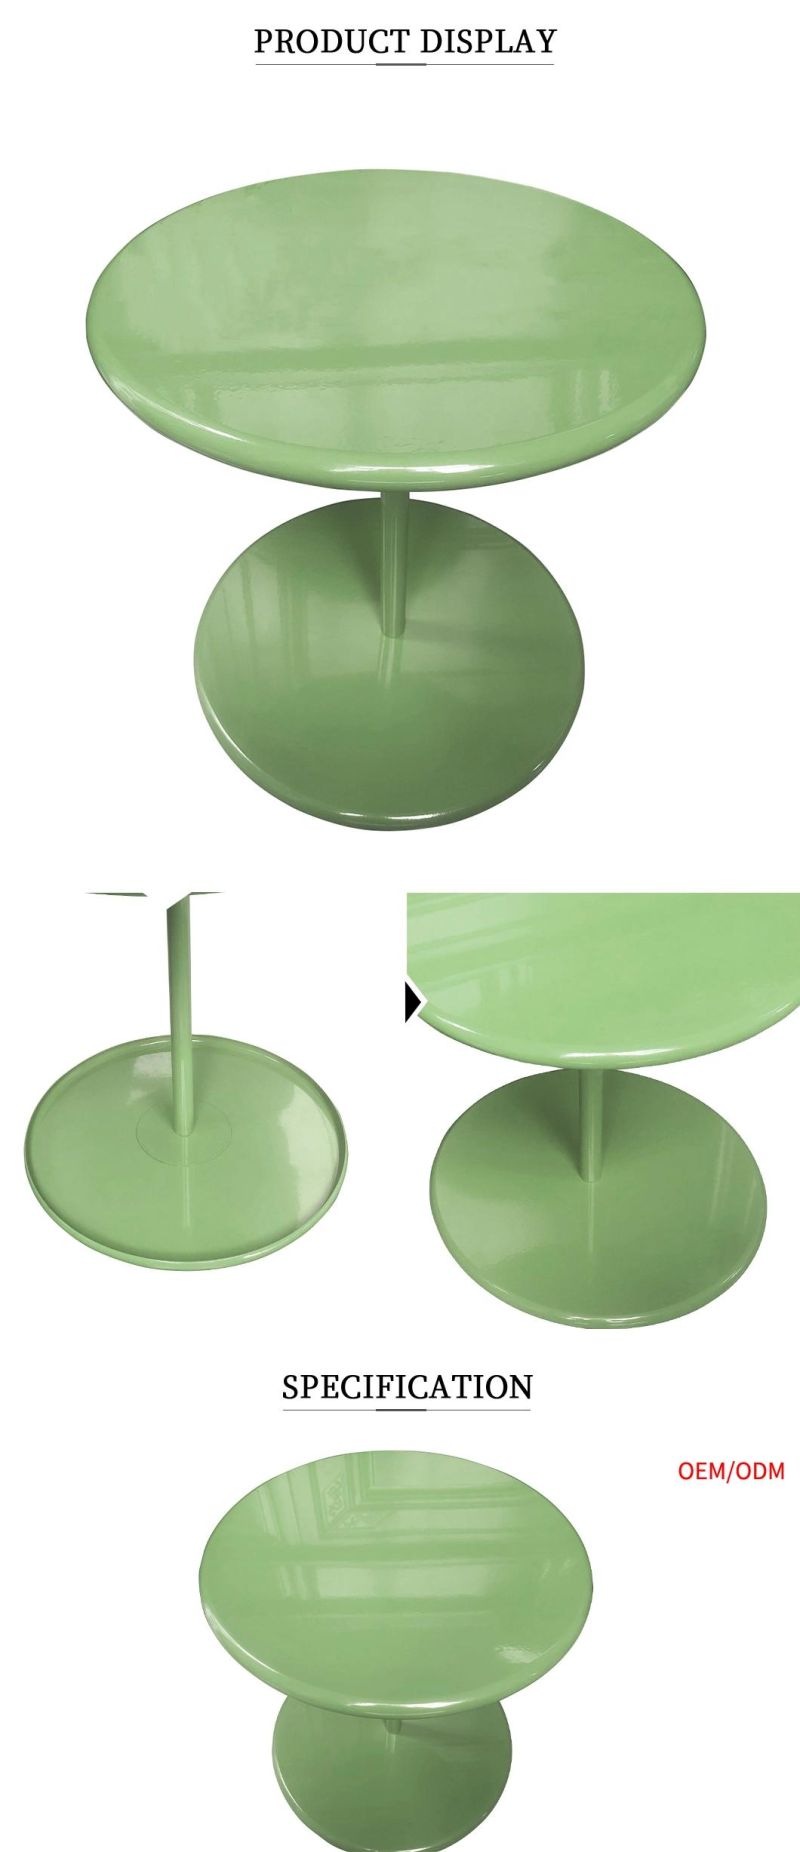 Low Price Unfolded Customized OEM/ODM Dining Table Tea Green Home Furniture